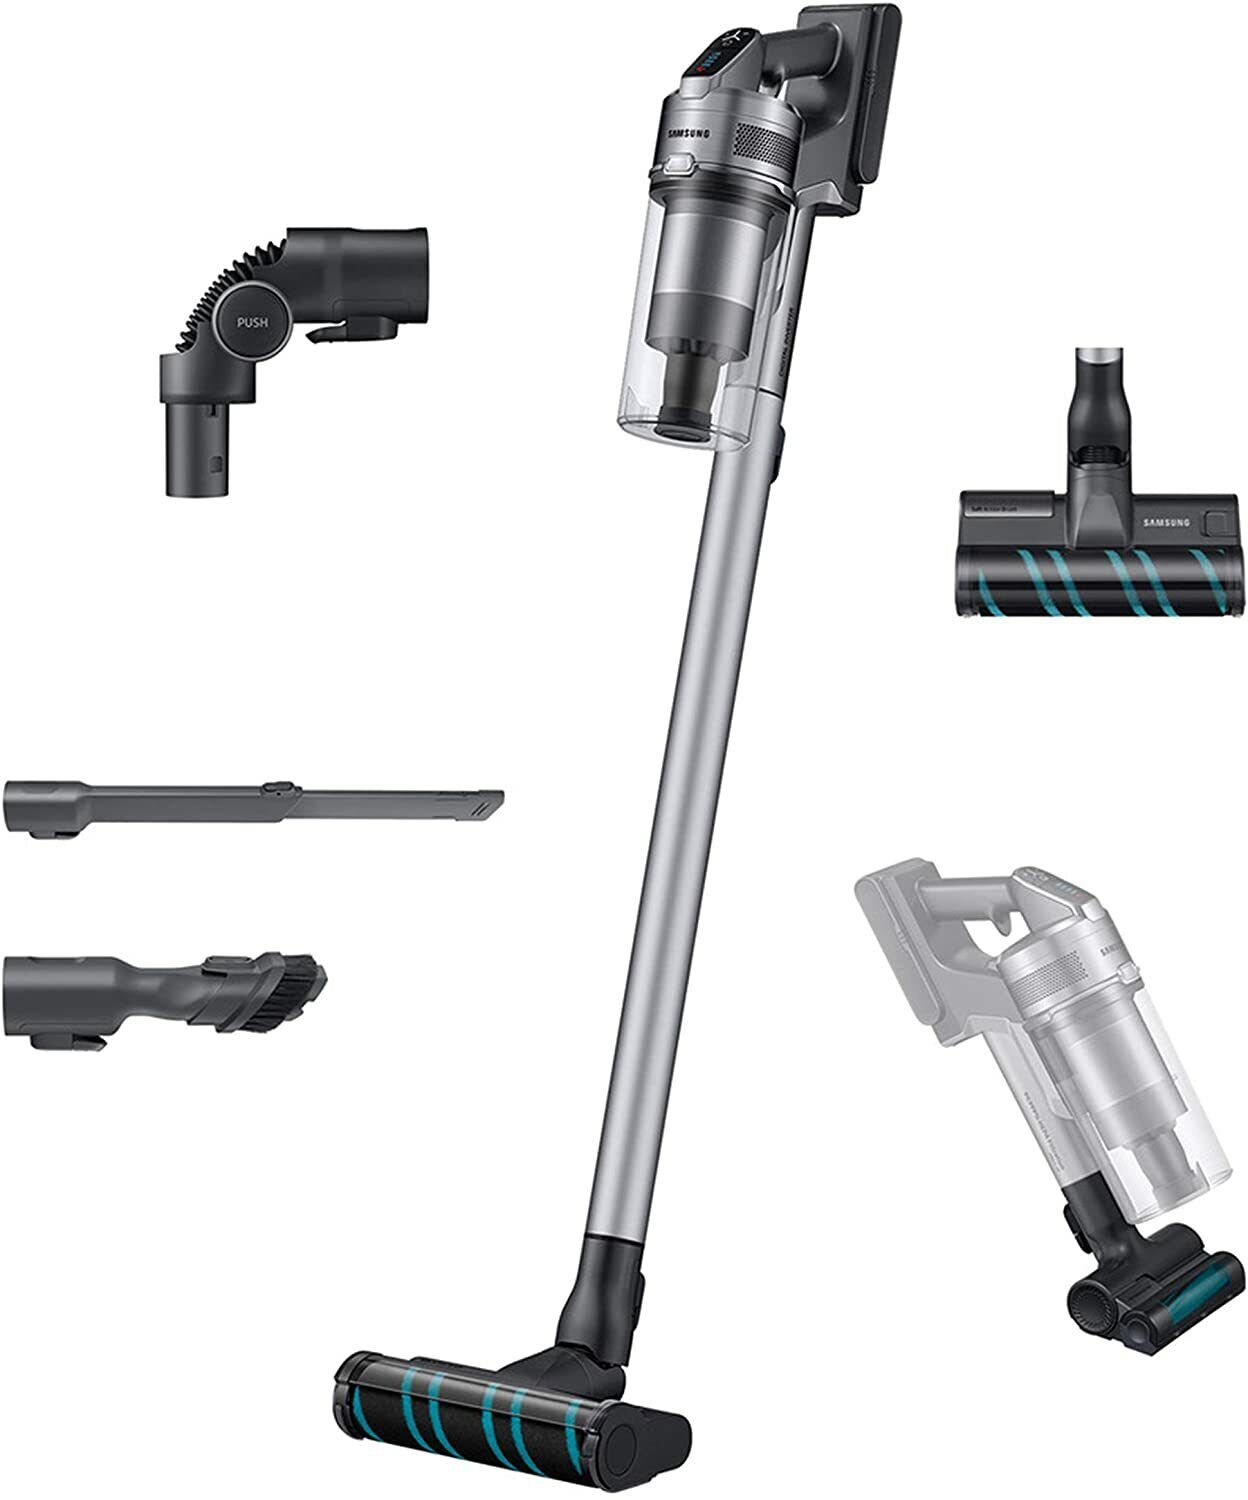 Samsung Jet 75 Stick Cordless Lightweight Vacuum Cleaner with Removable Battery